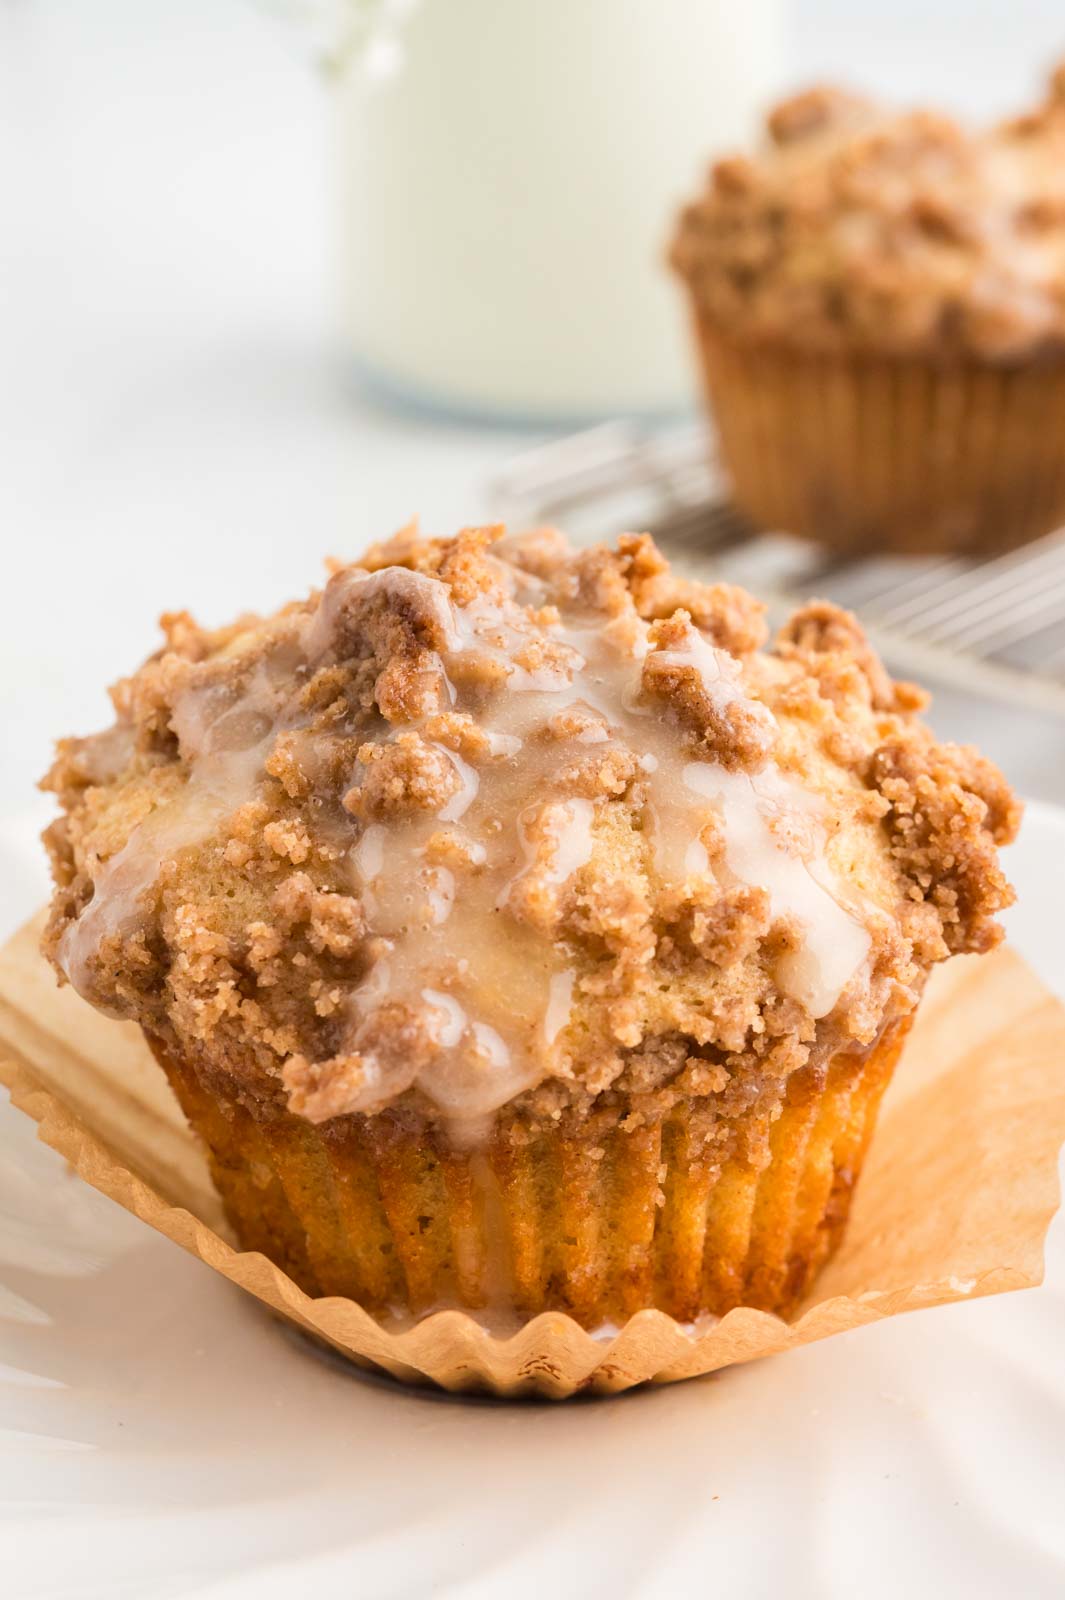 a baked and glazed coffee cake muffin on a table 